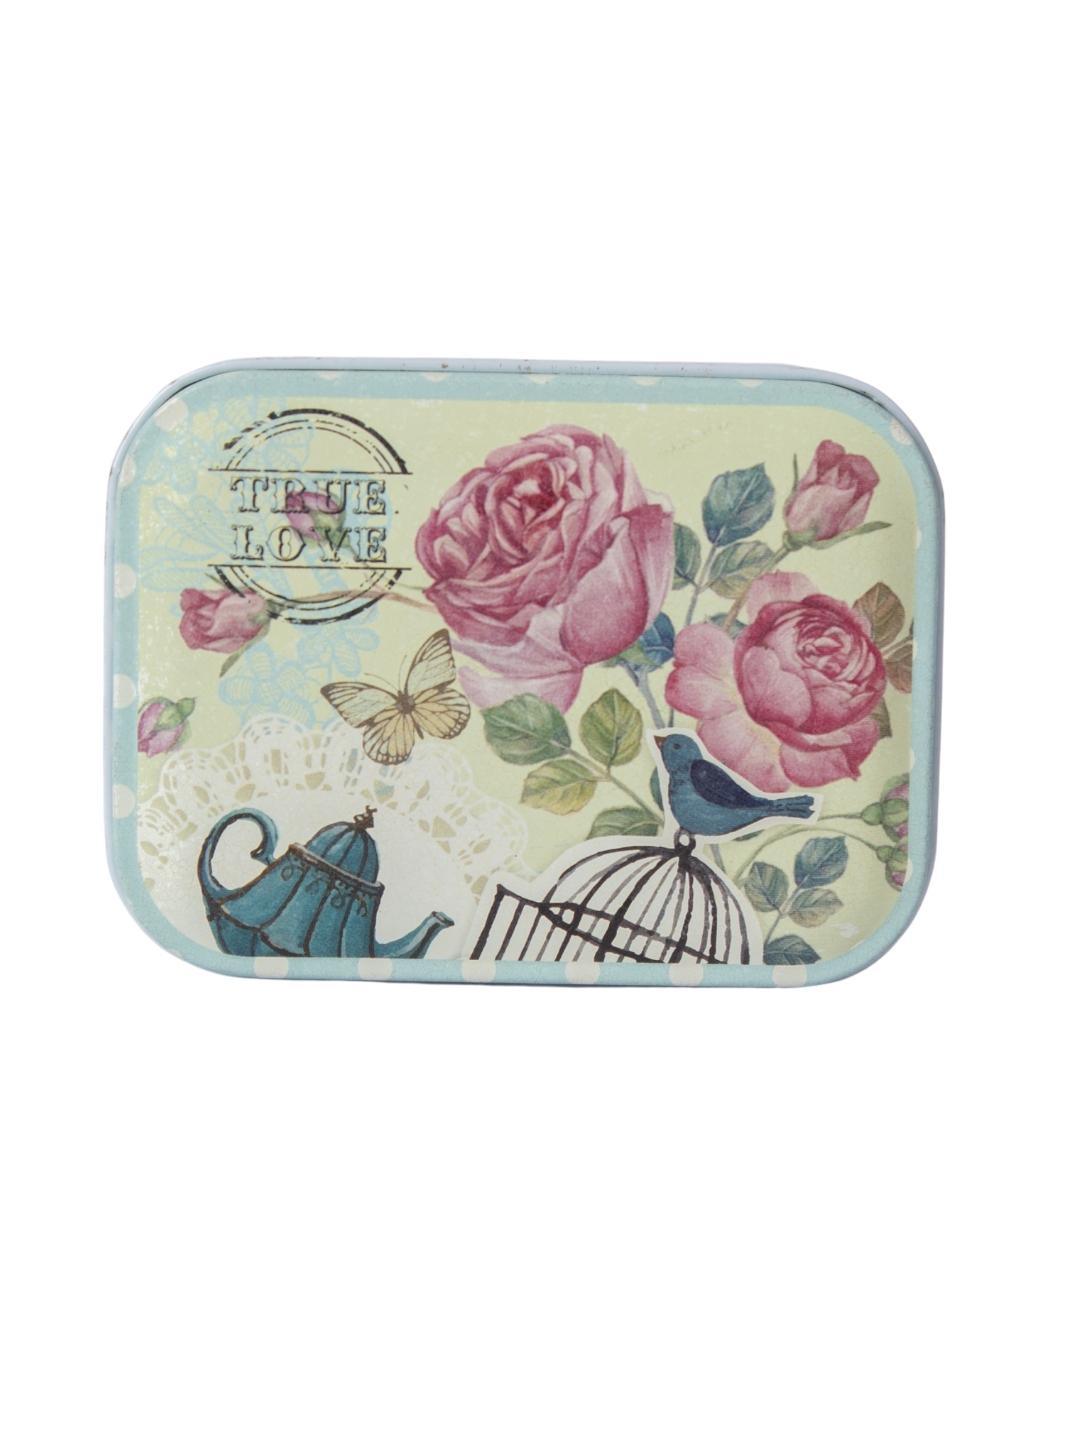 Floral Metal Tin Container Box - Blue Cyan